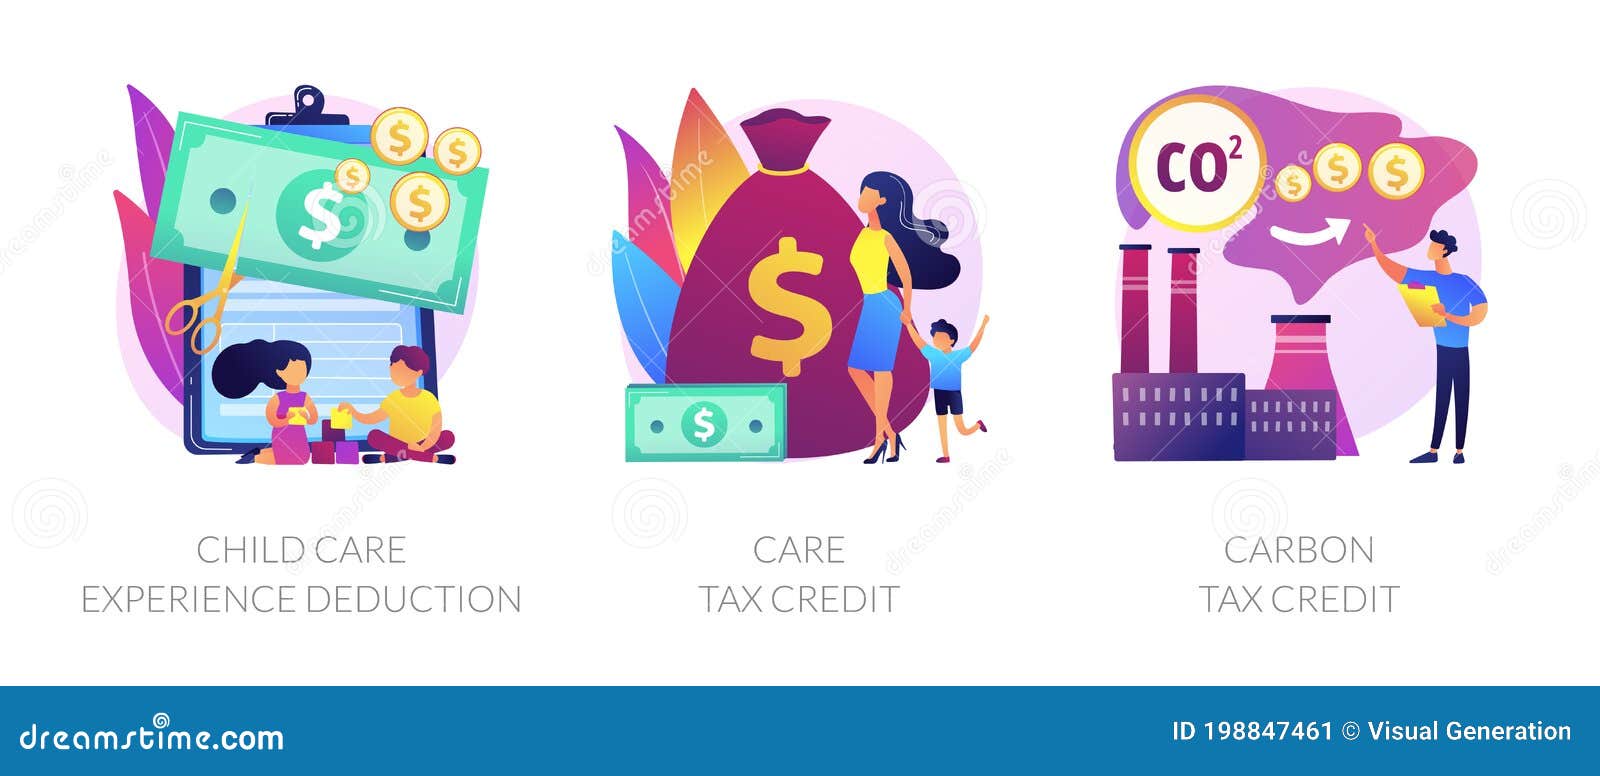 tax-deduction-exemption-and-credit-vector-concept-metaphors-stock